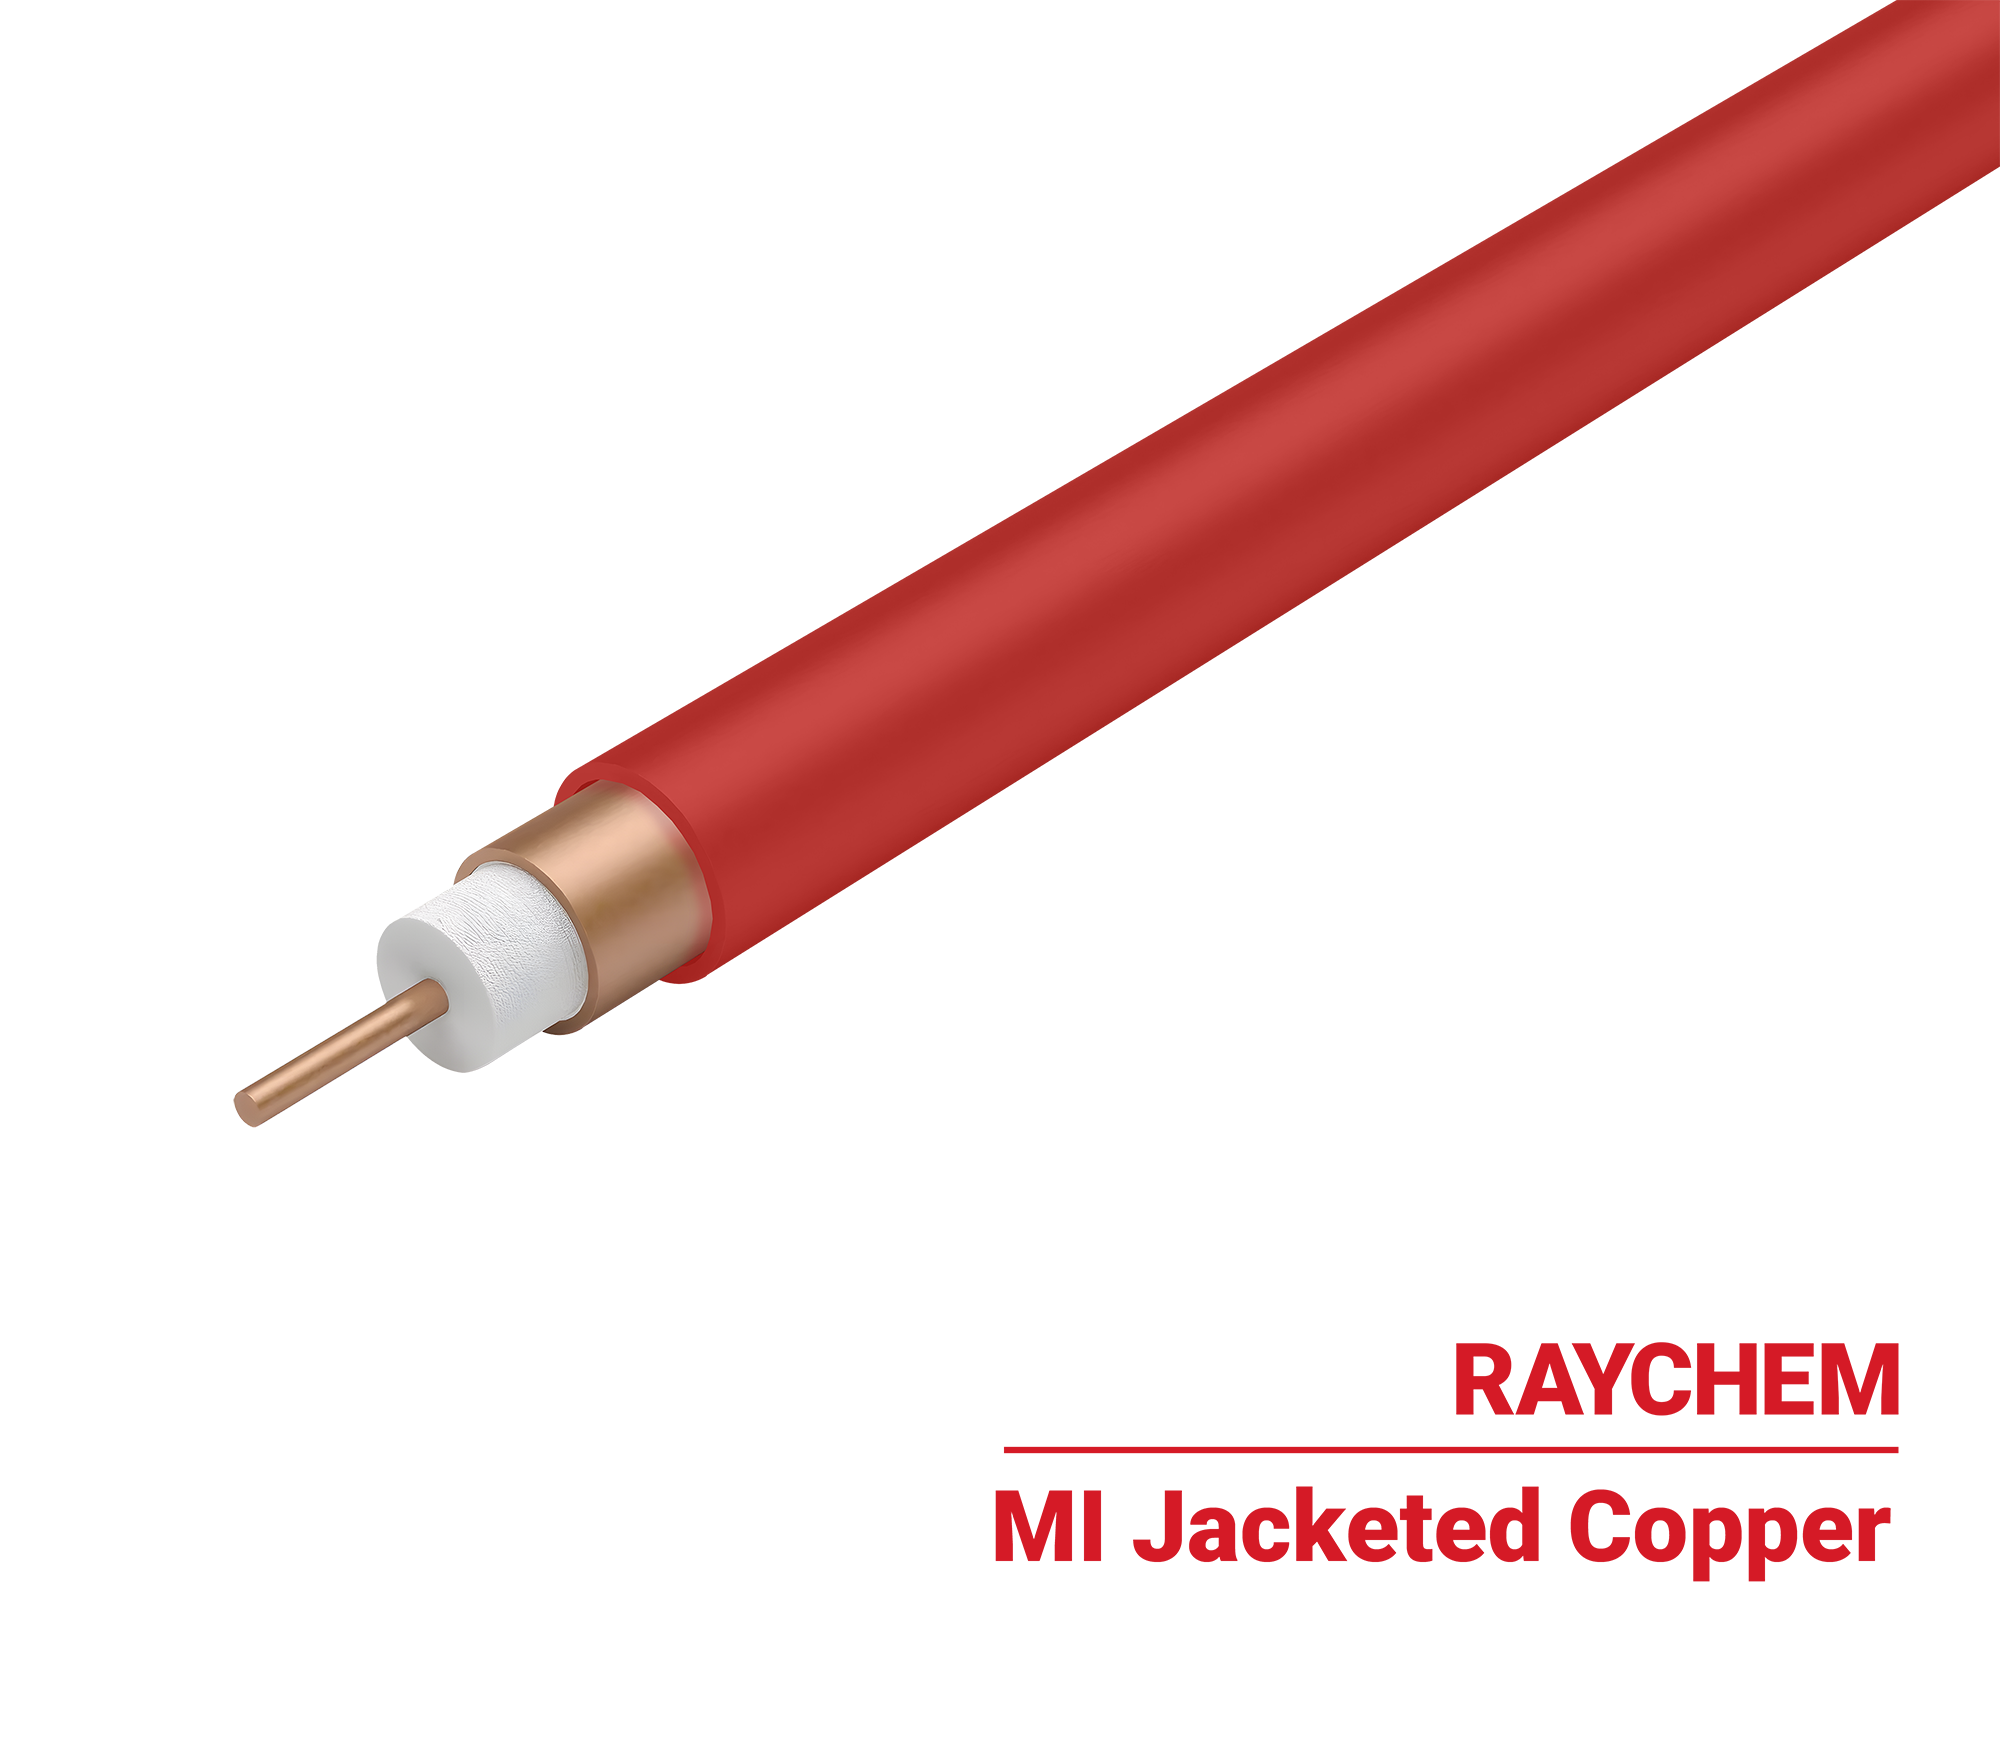 MI-Jacketed-Copper-Industrial-Heating-Cable-nVent-Raychem